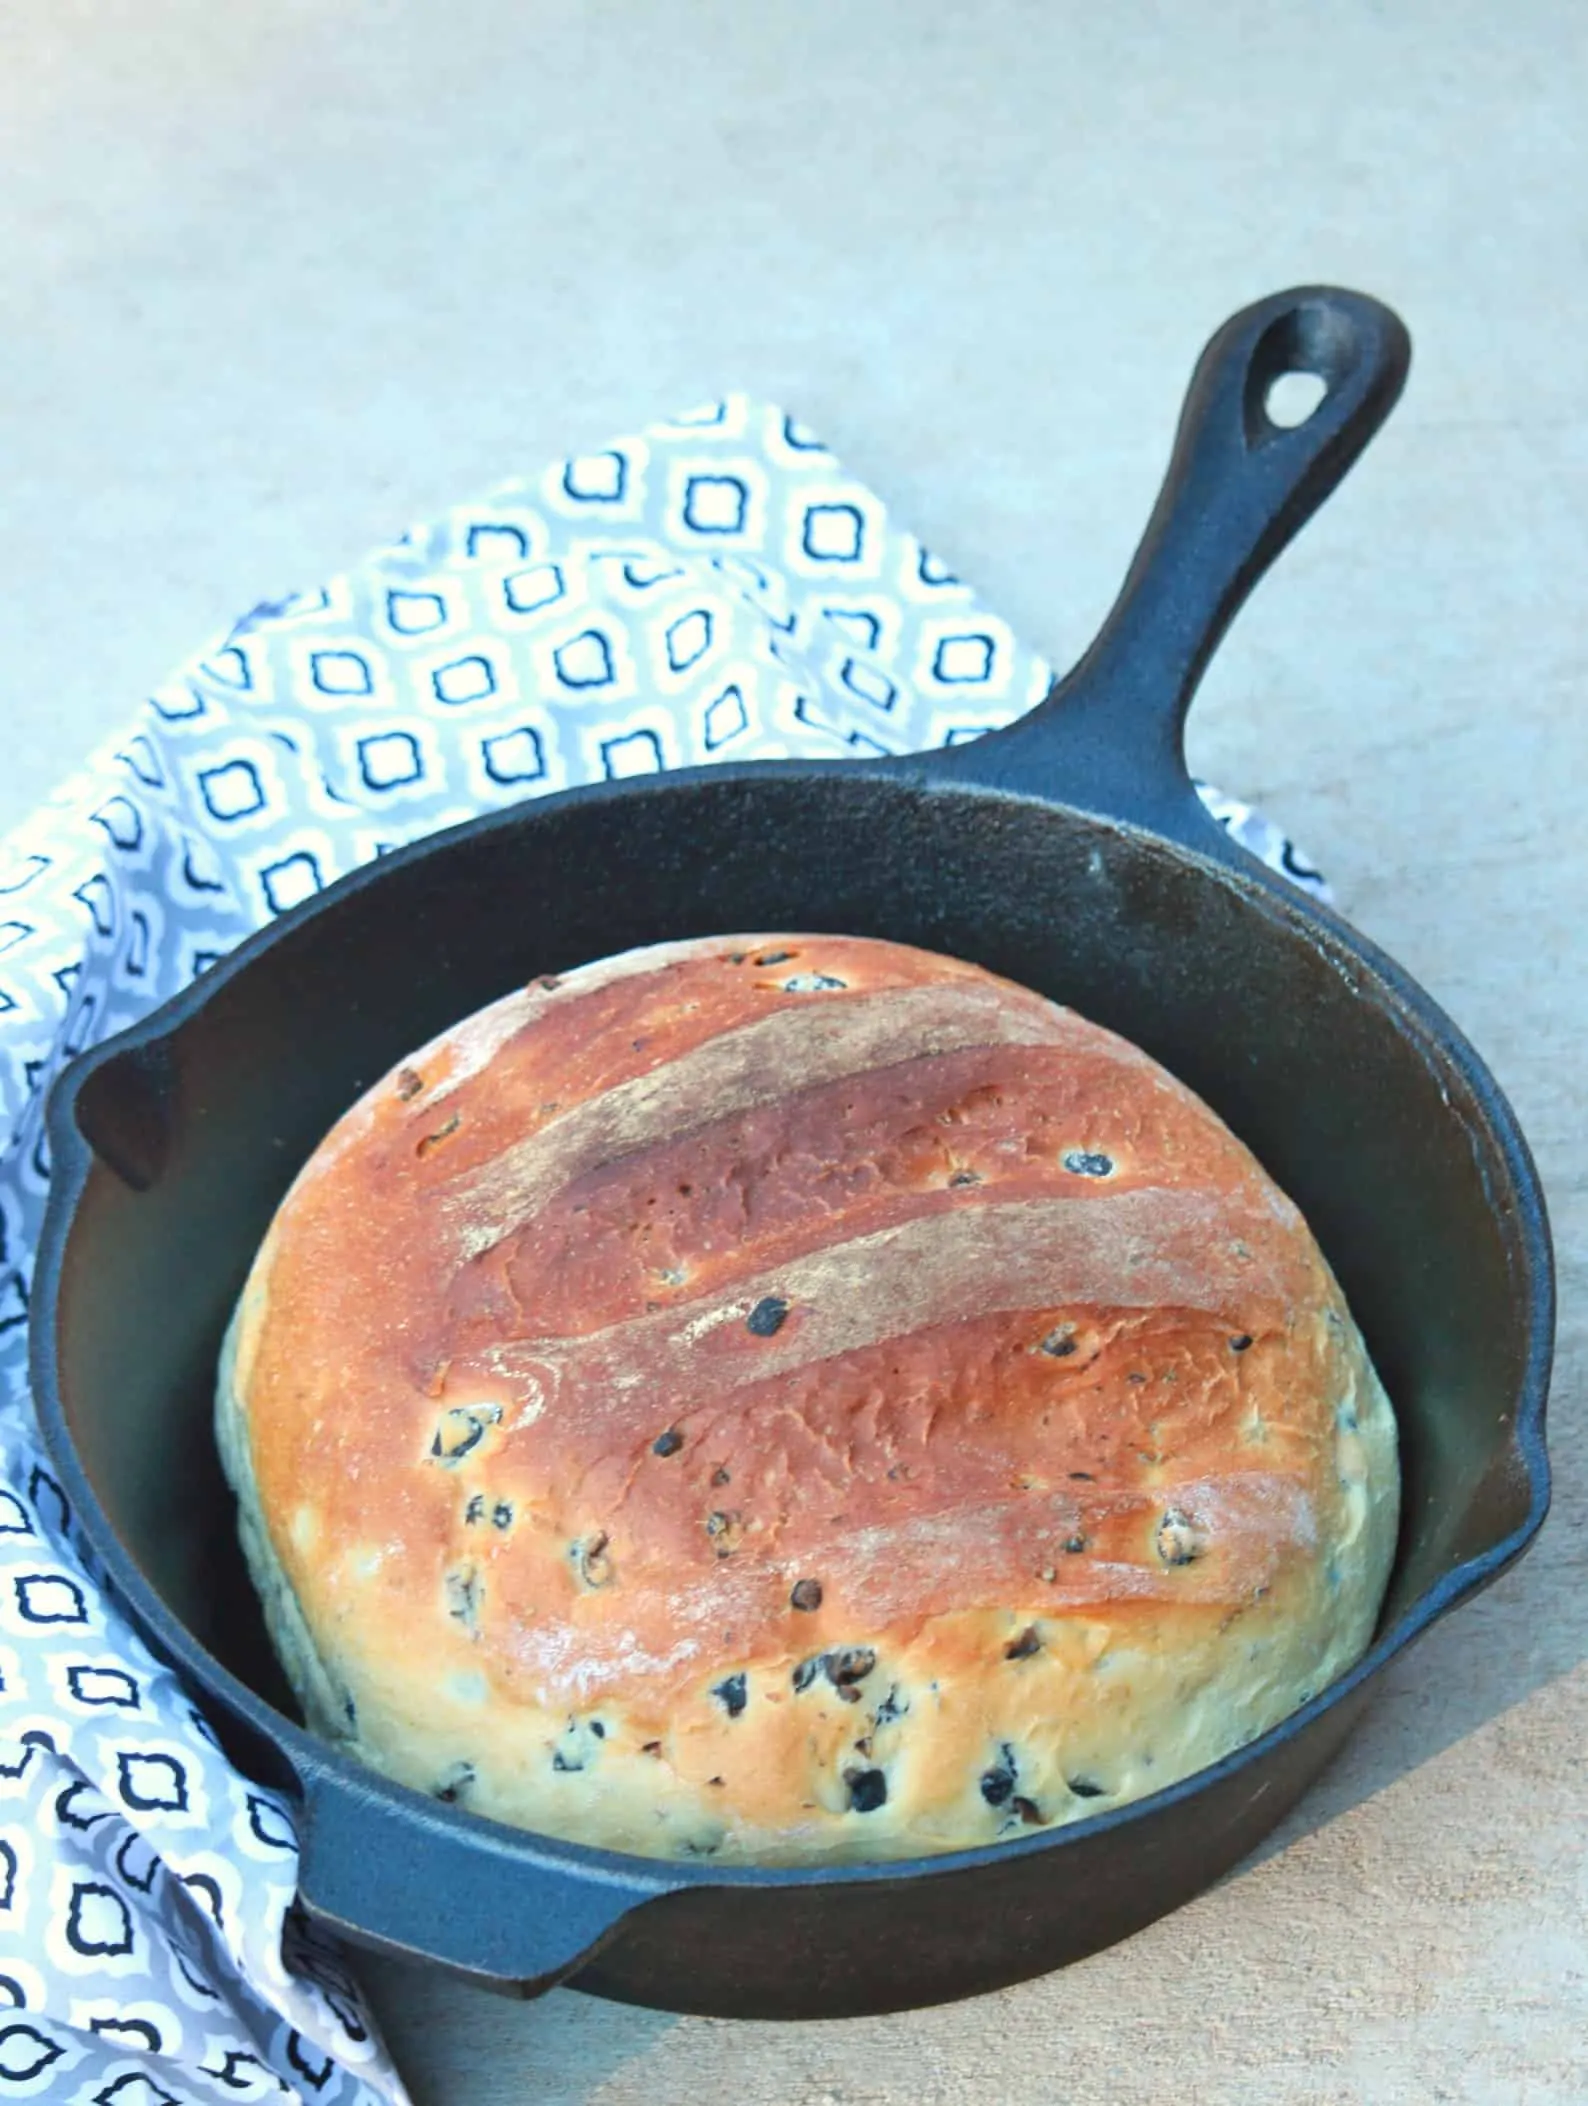 Moroccan Olive Bread - Vegan Olive Bread in a pan